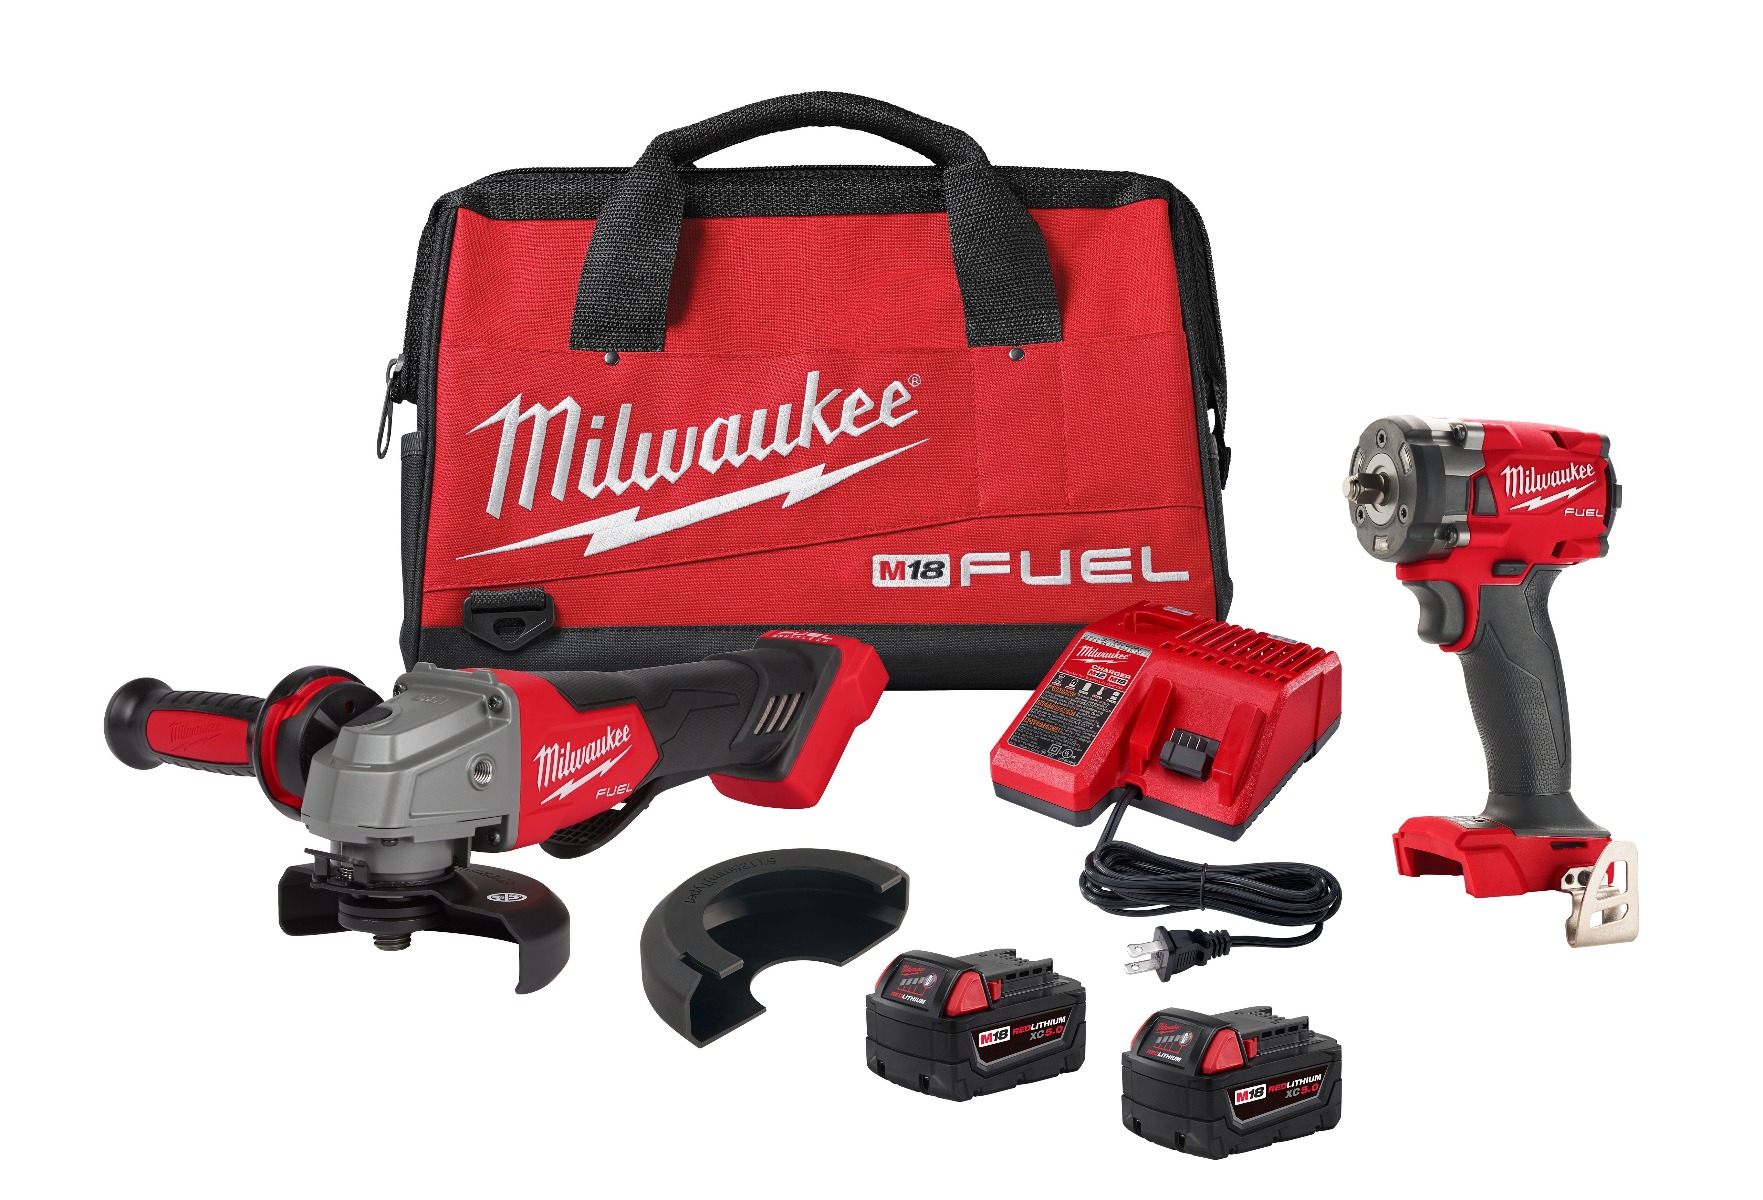 M18 FUEL™ Compact Impact Wrench and Grinder 2-Tool Combo Kit